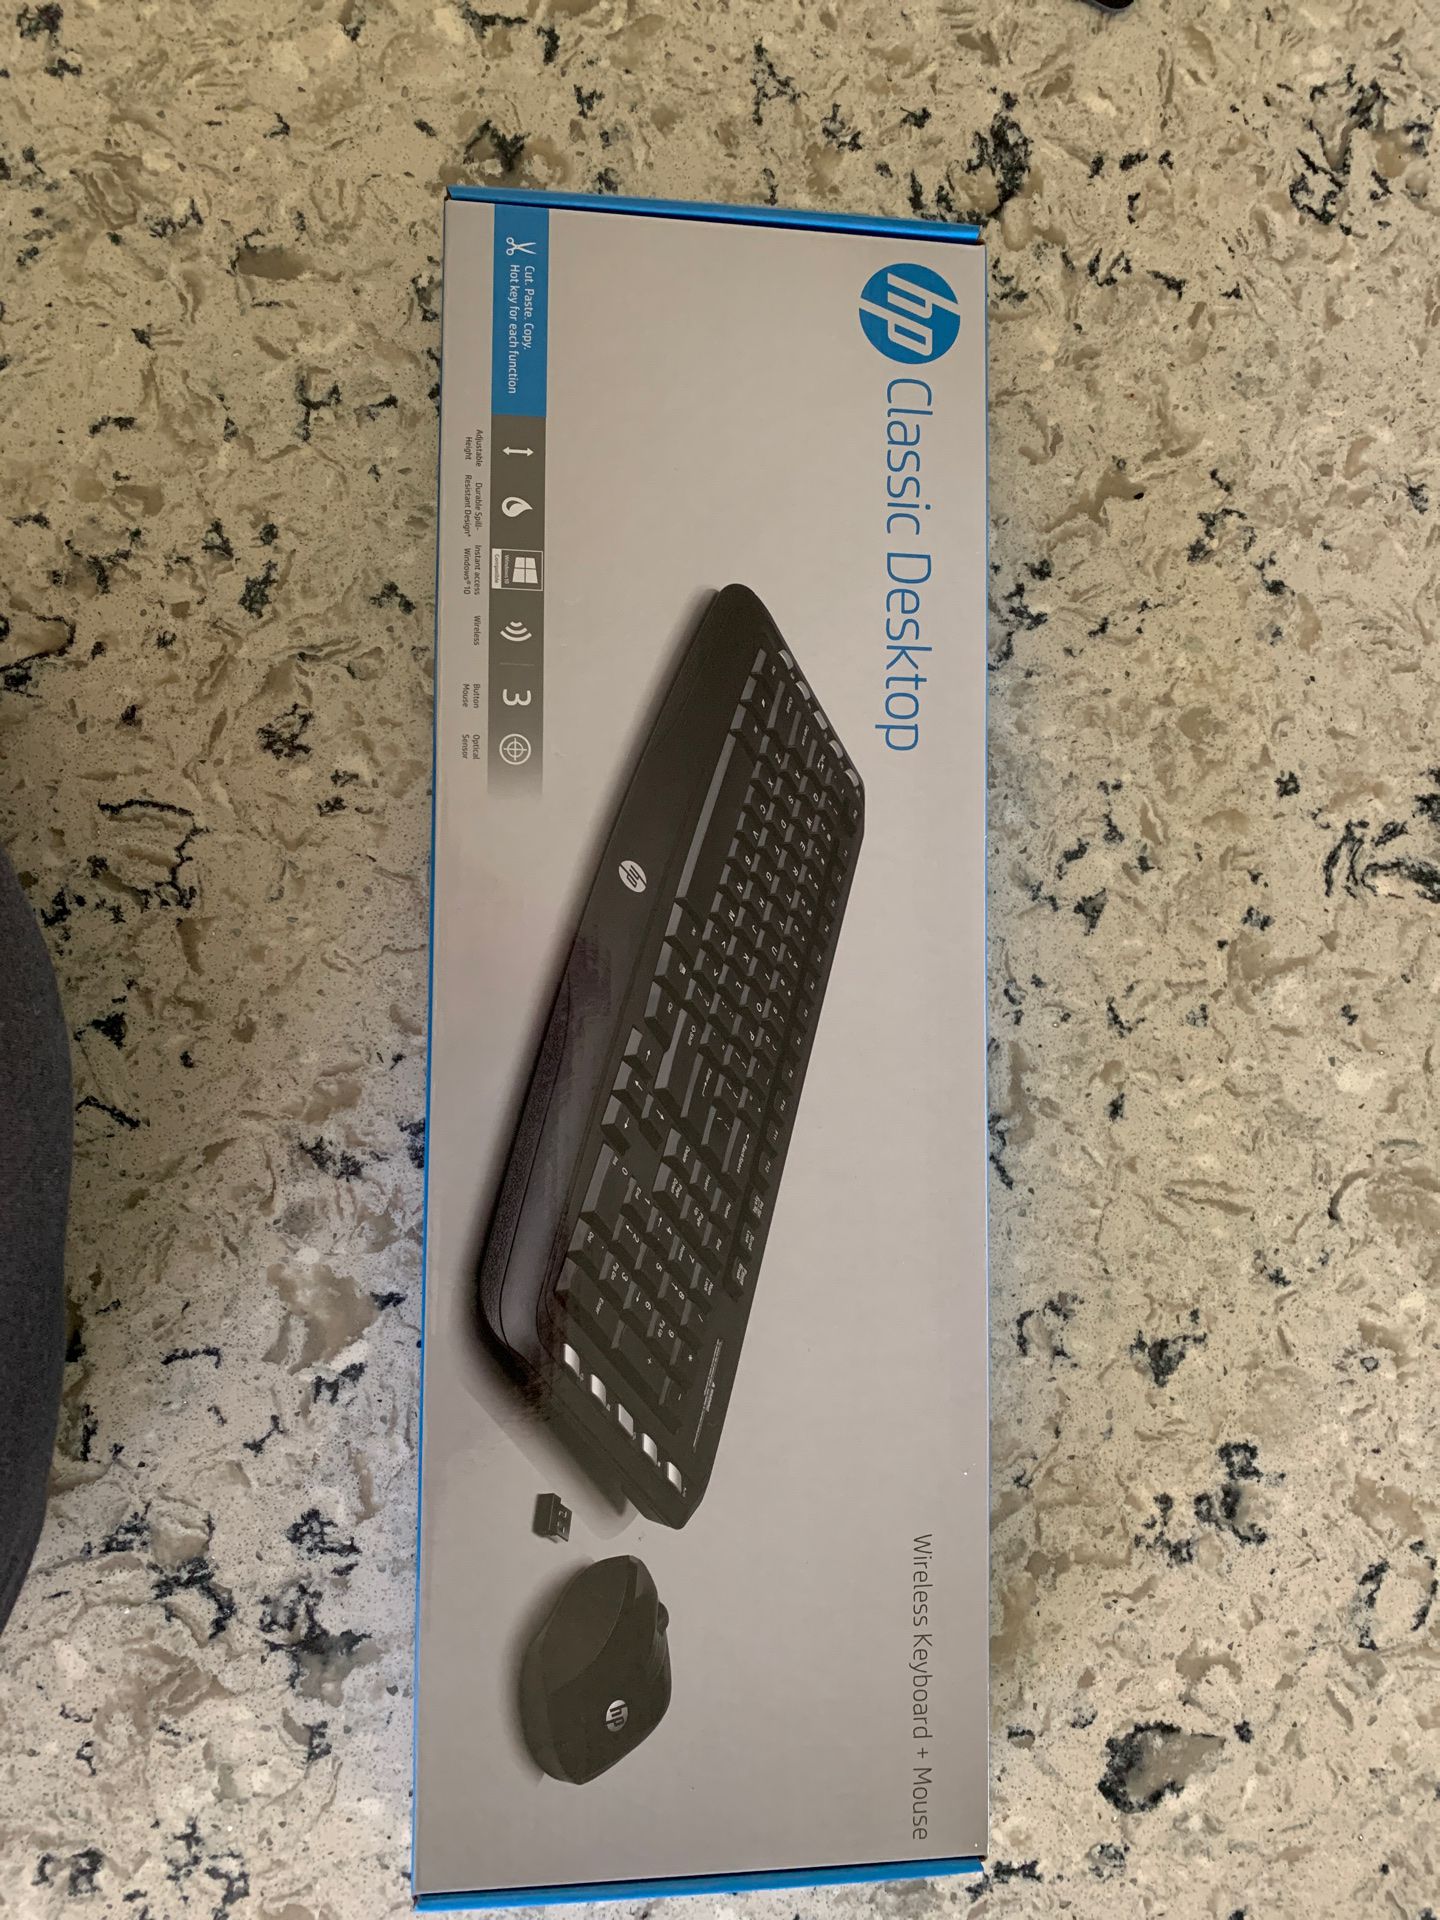 HP wireless keyboard and mouse